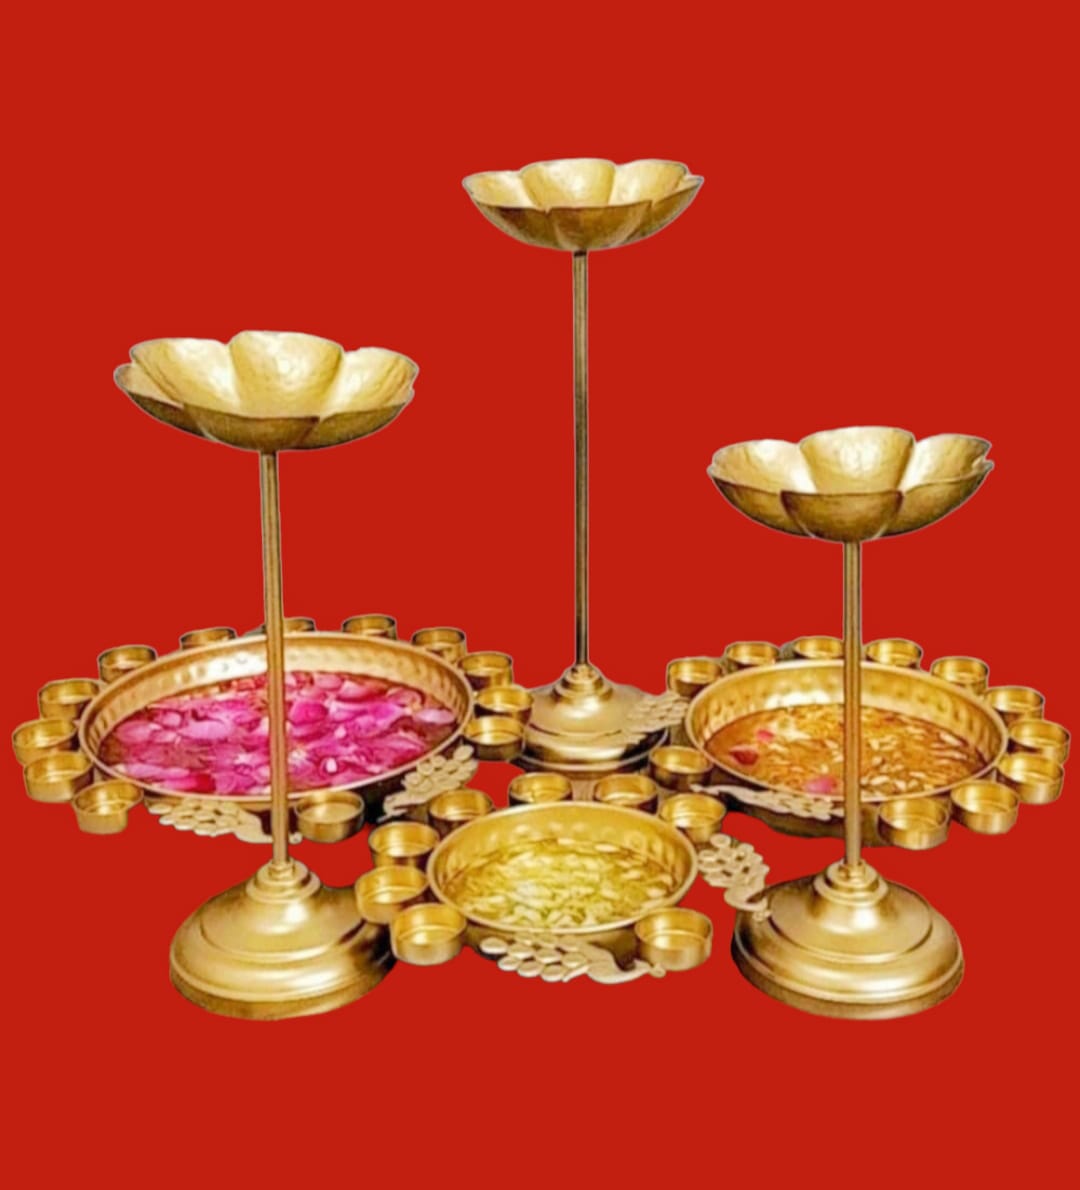 Decor Diwali Festival With Peacock Urli Bowl with Lotus Stand (set of 6pcs)